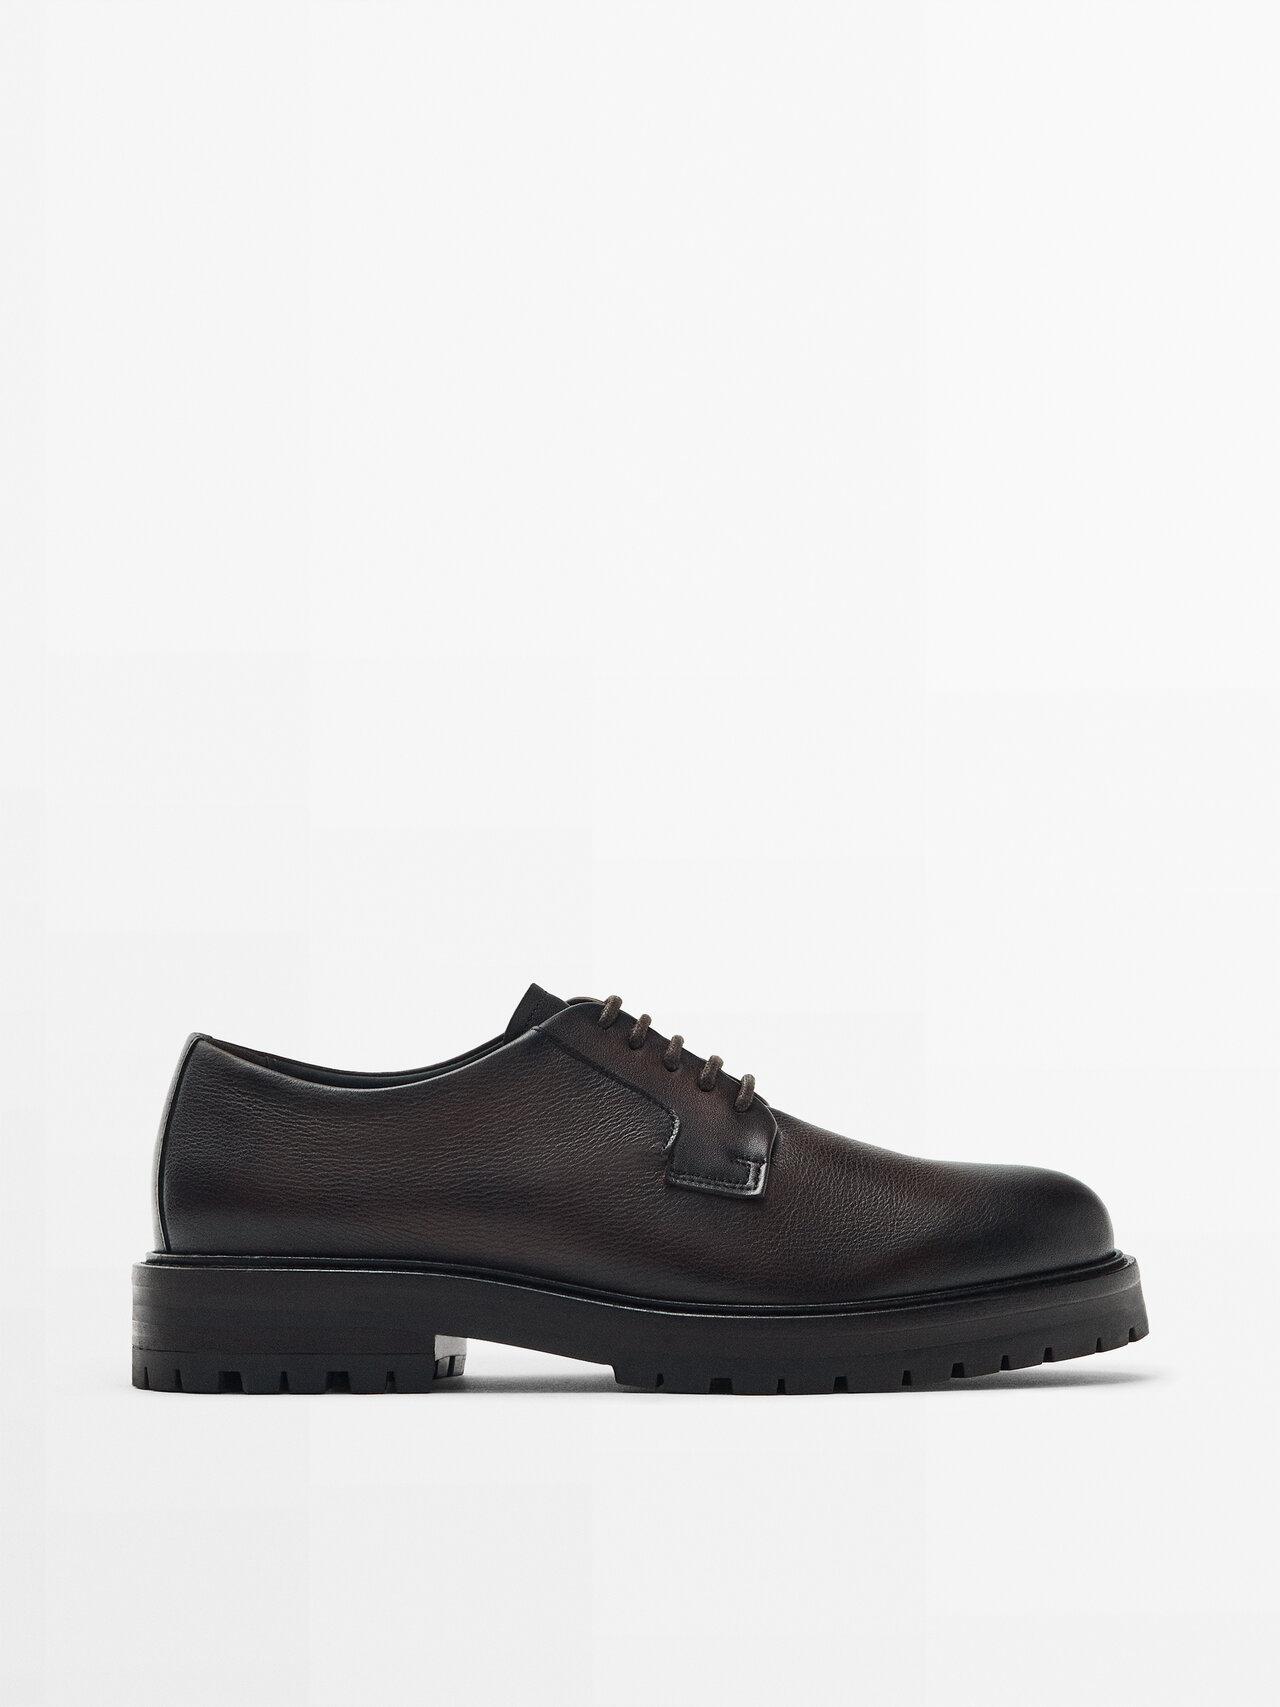 MASSIMO DUTTI Nappa Leather Derby Shoes in Black for Men | Lyst